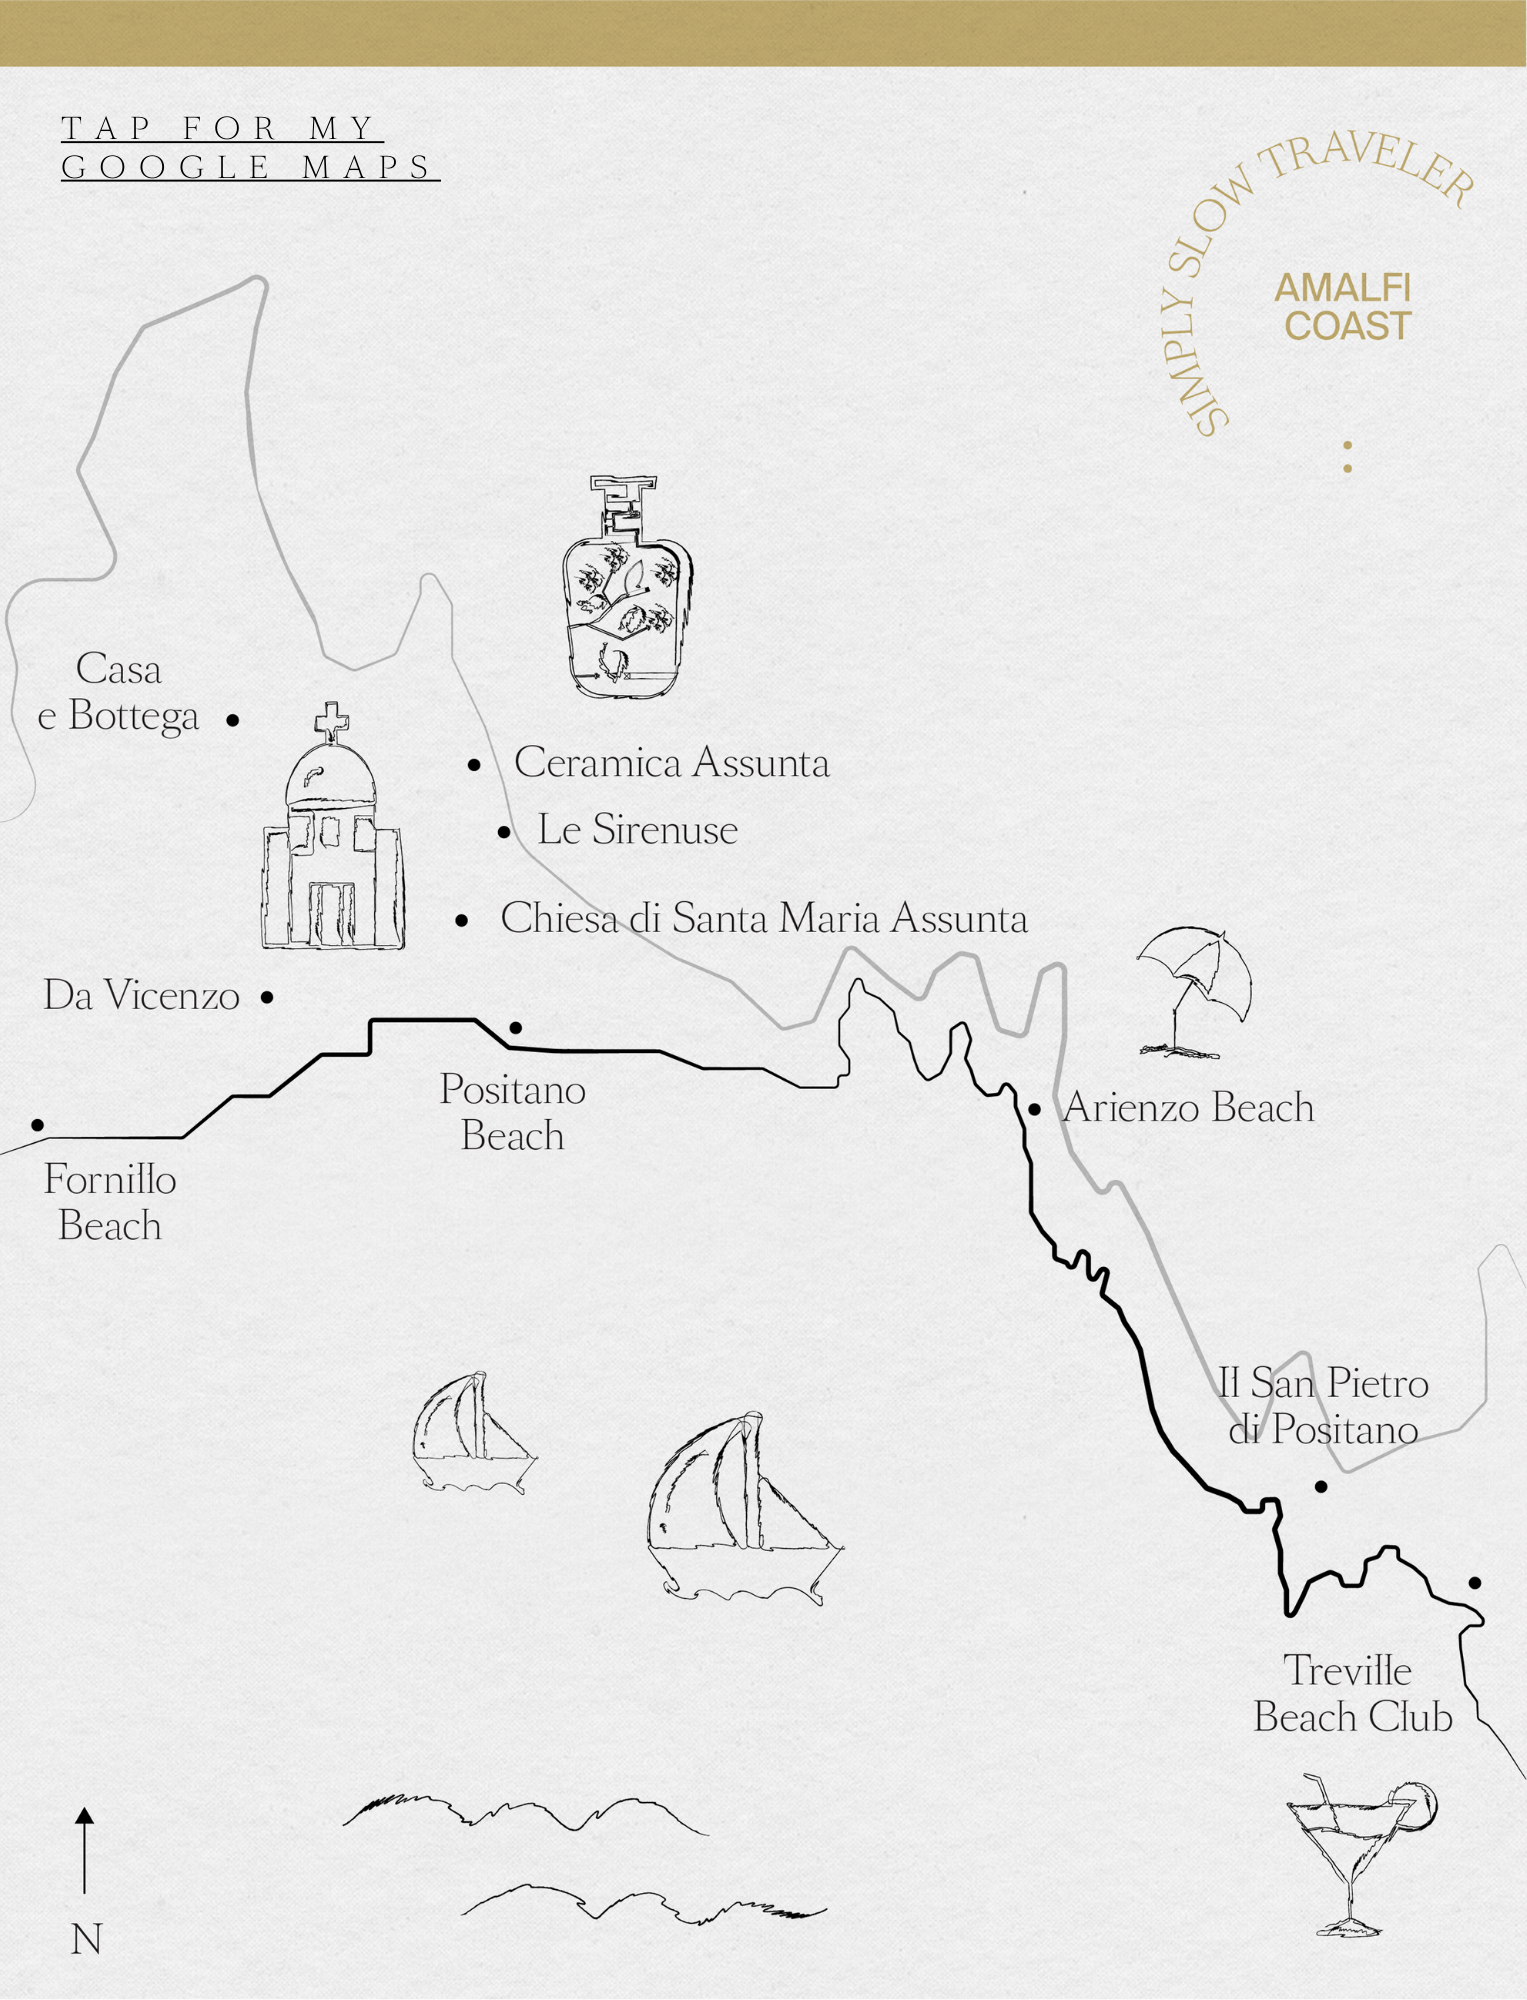 A Guide to the Amalfi Coast - the Map, by Simply Slow Traveler